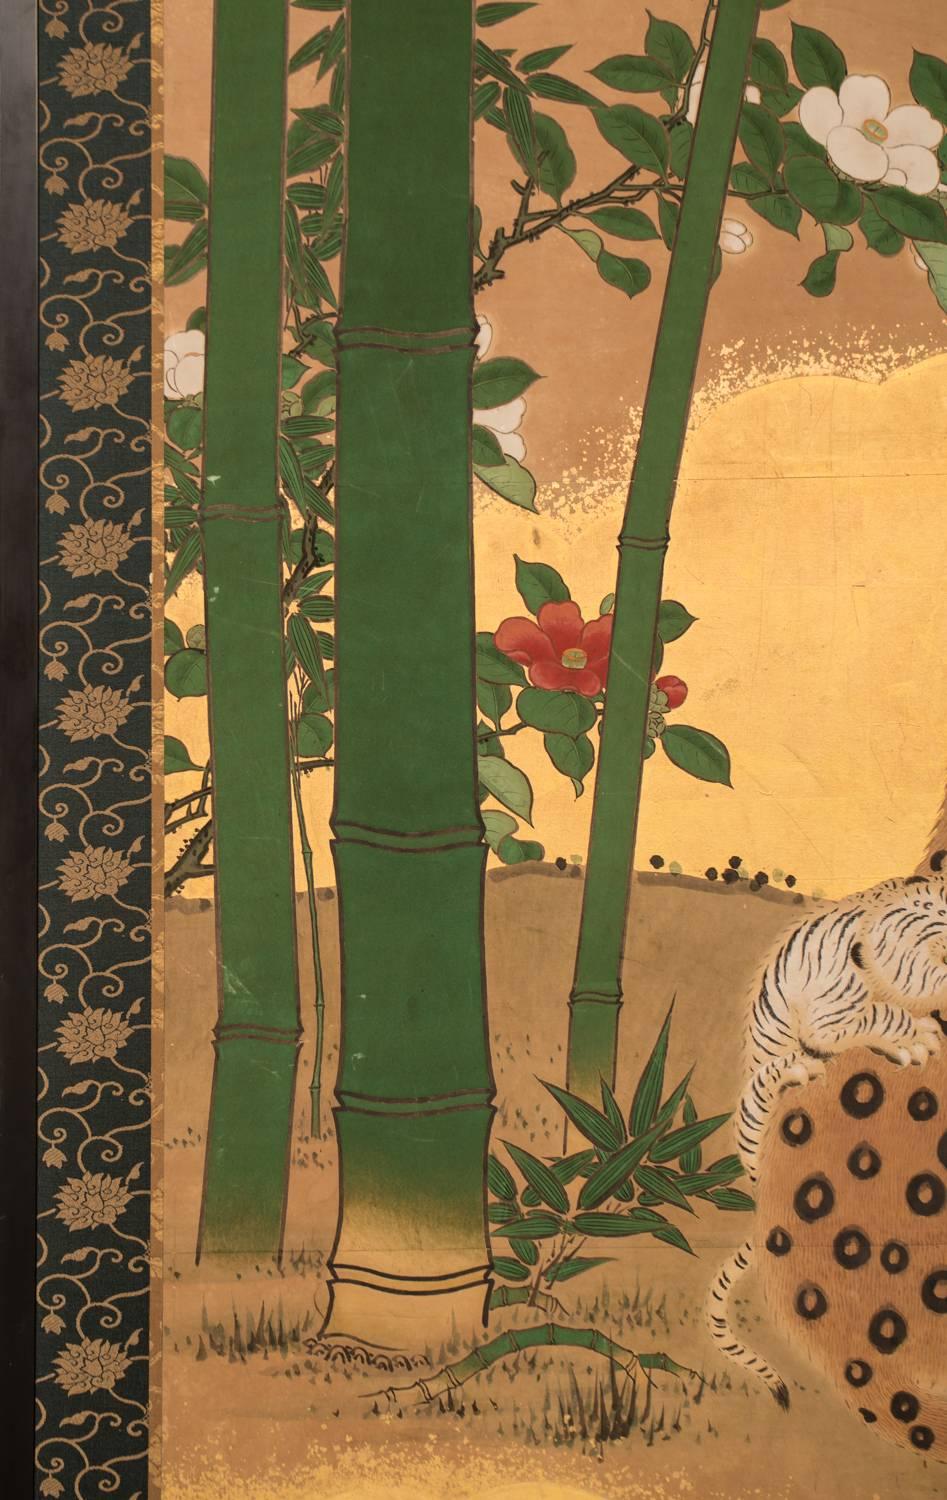 With gold clouds on gold leaf with camellia on river's edge.
In history, Japanese artists did not see leopards or tigers in real life because the animals were not native to Japan, they lived in China. Artists were only exposed to skins and stories